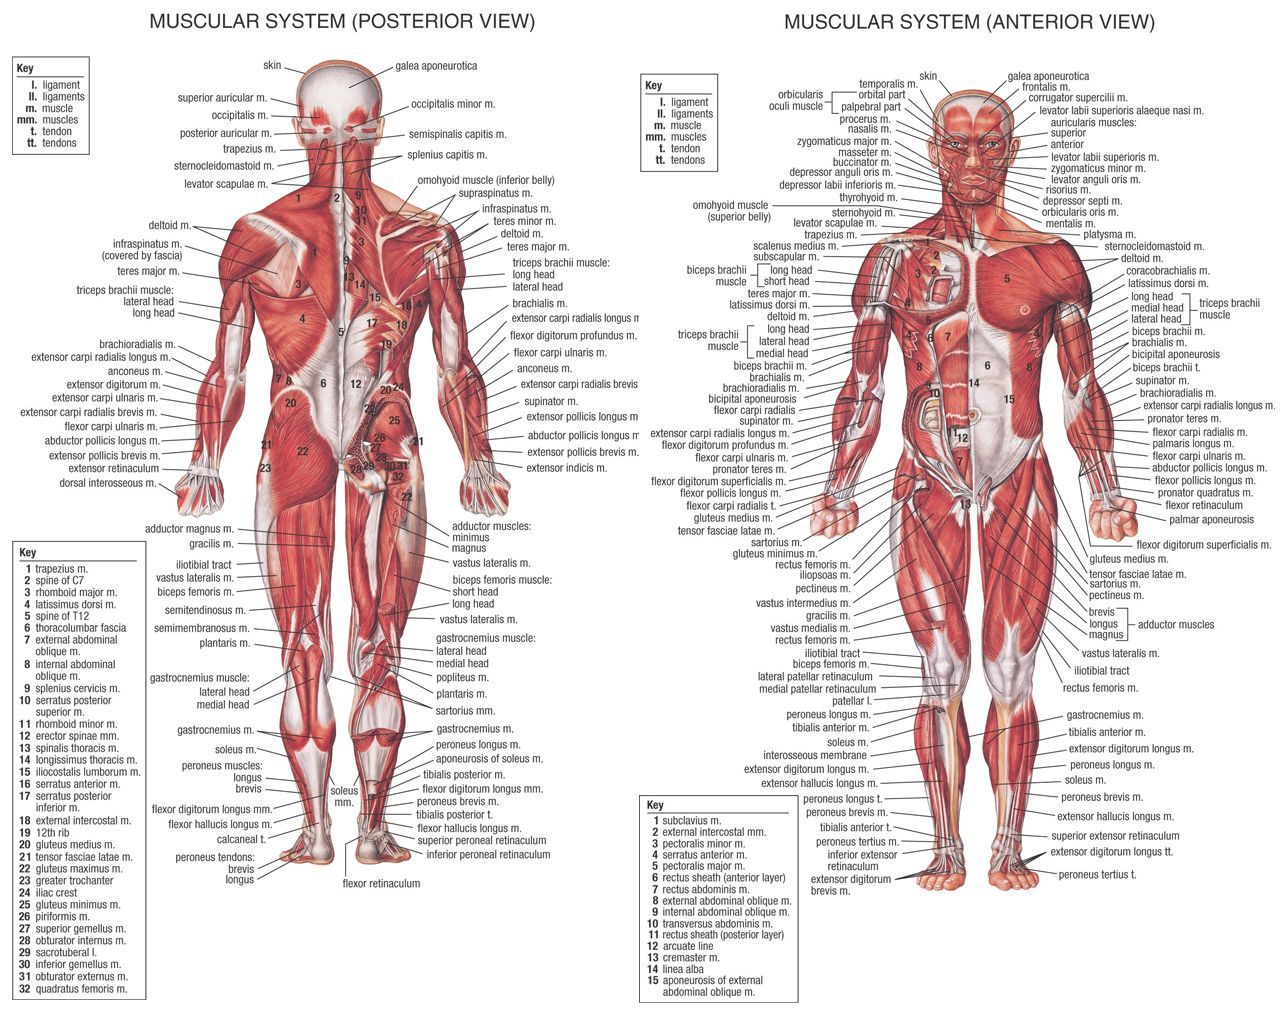 THE HUMAN BODY MUSCLES